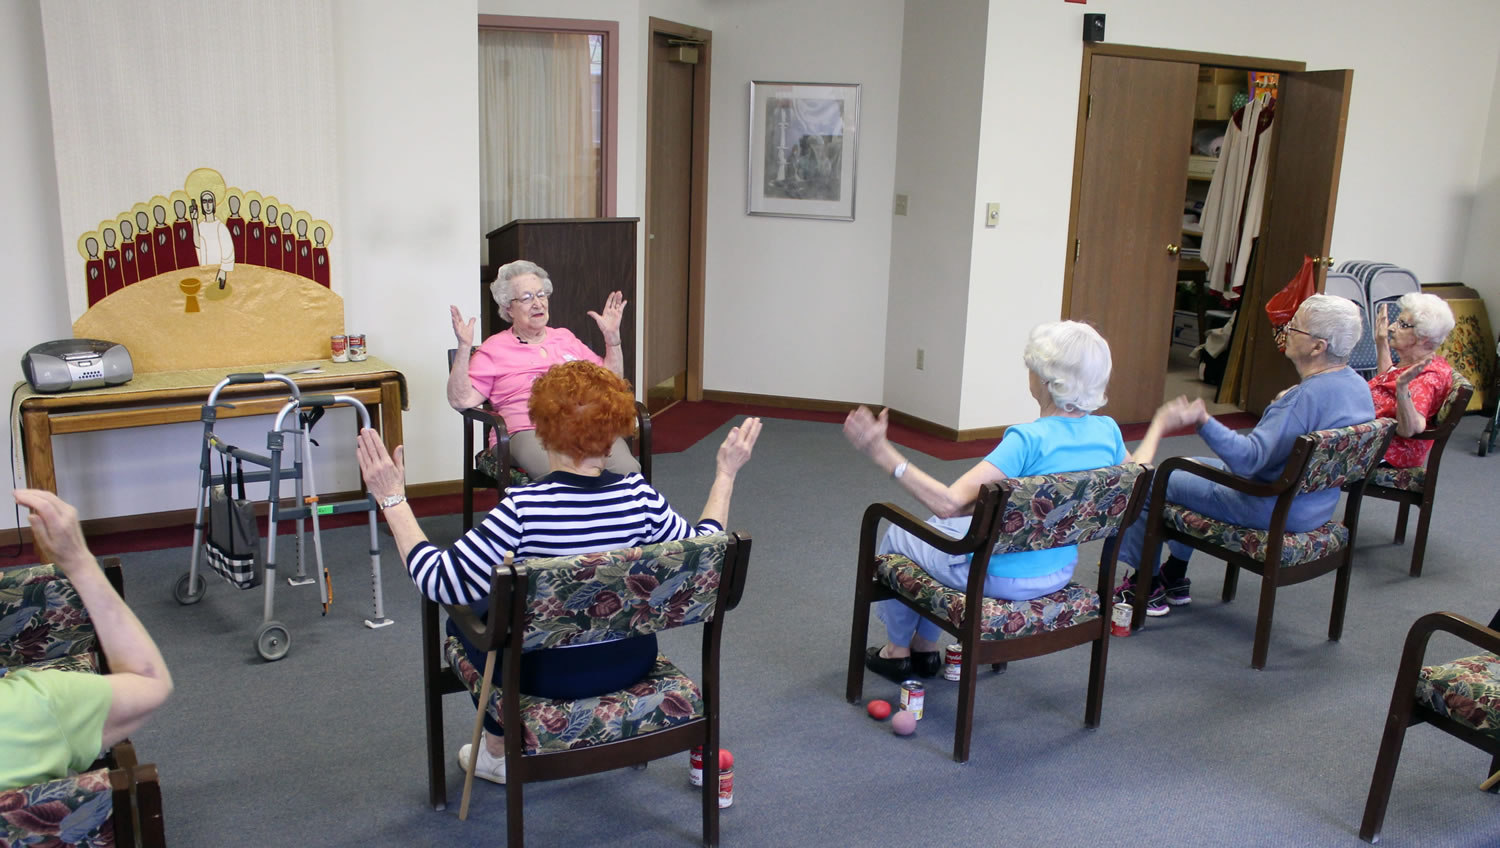 Hildegard Gigl, top, leads an exercise class at Hawthorne Terrace independent retirement center in Wauwatosa, Wis. Gigl, who turns 99 in June, is the oldest one in the class.